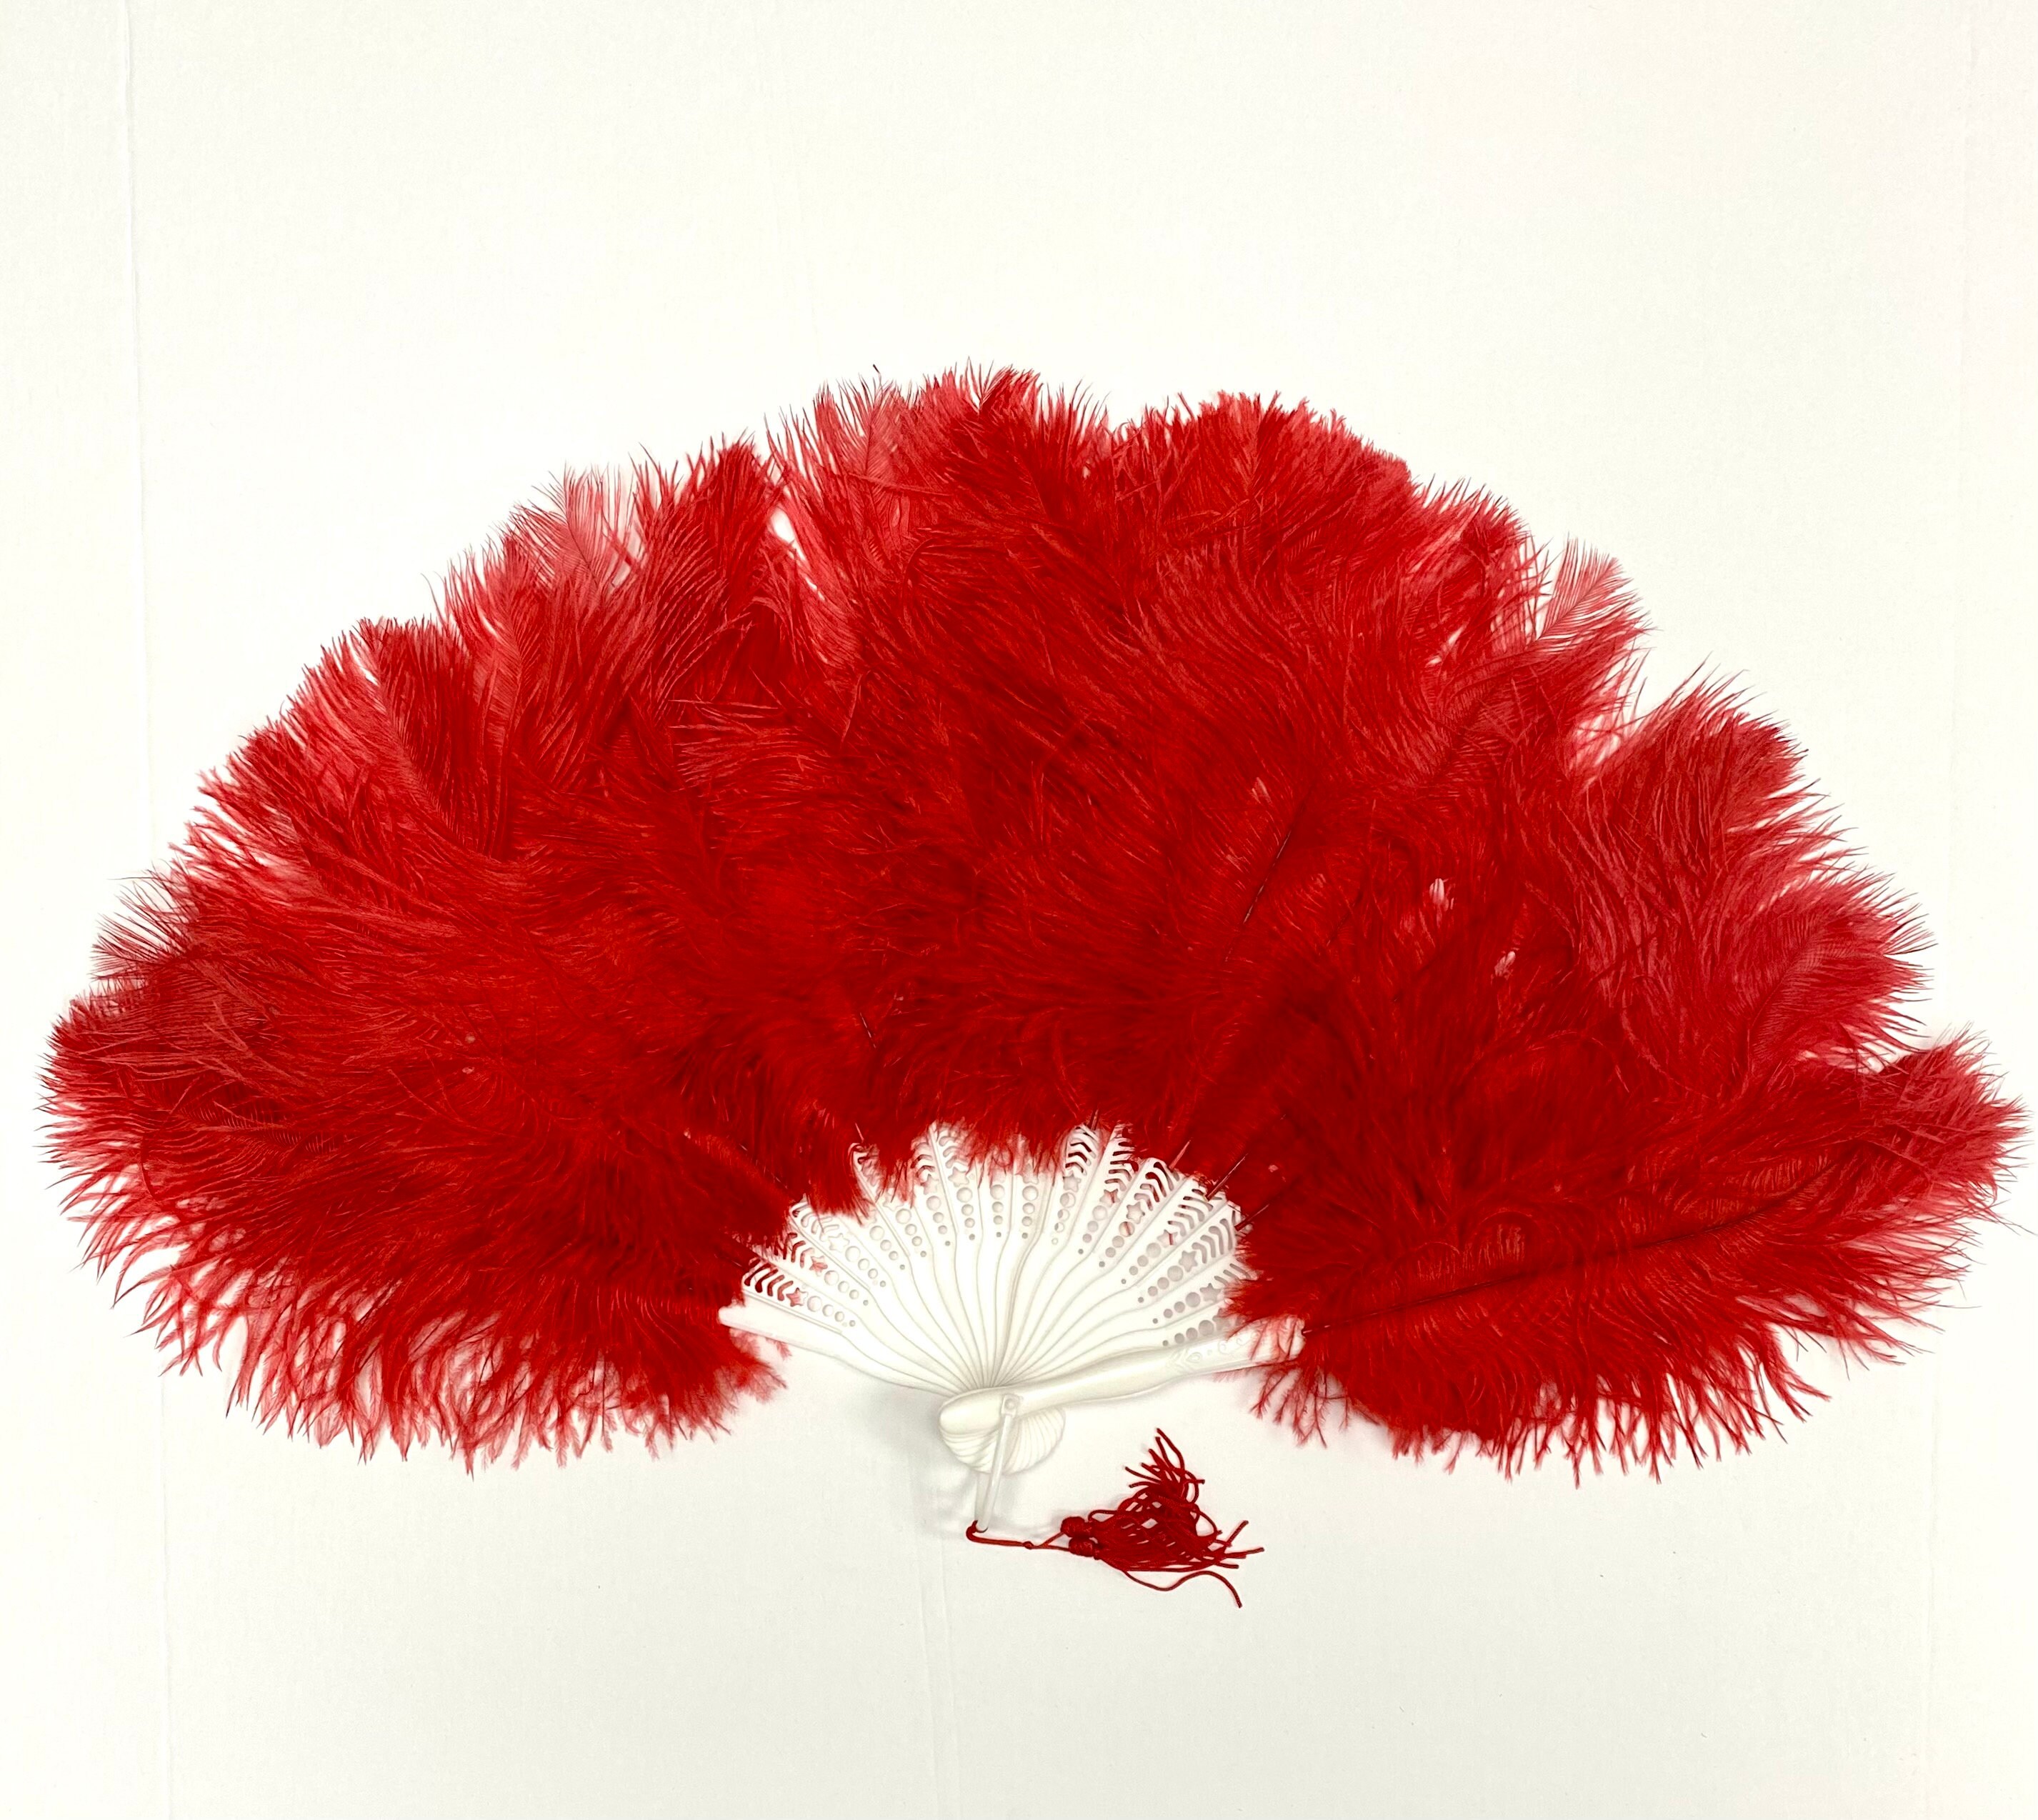 LARGE OSTRICH FAN - RED Feathers 50 x 30 Sally  Rand/Burlesque/Costume/Show